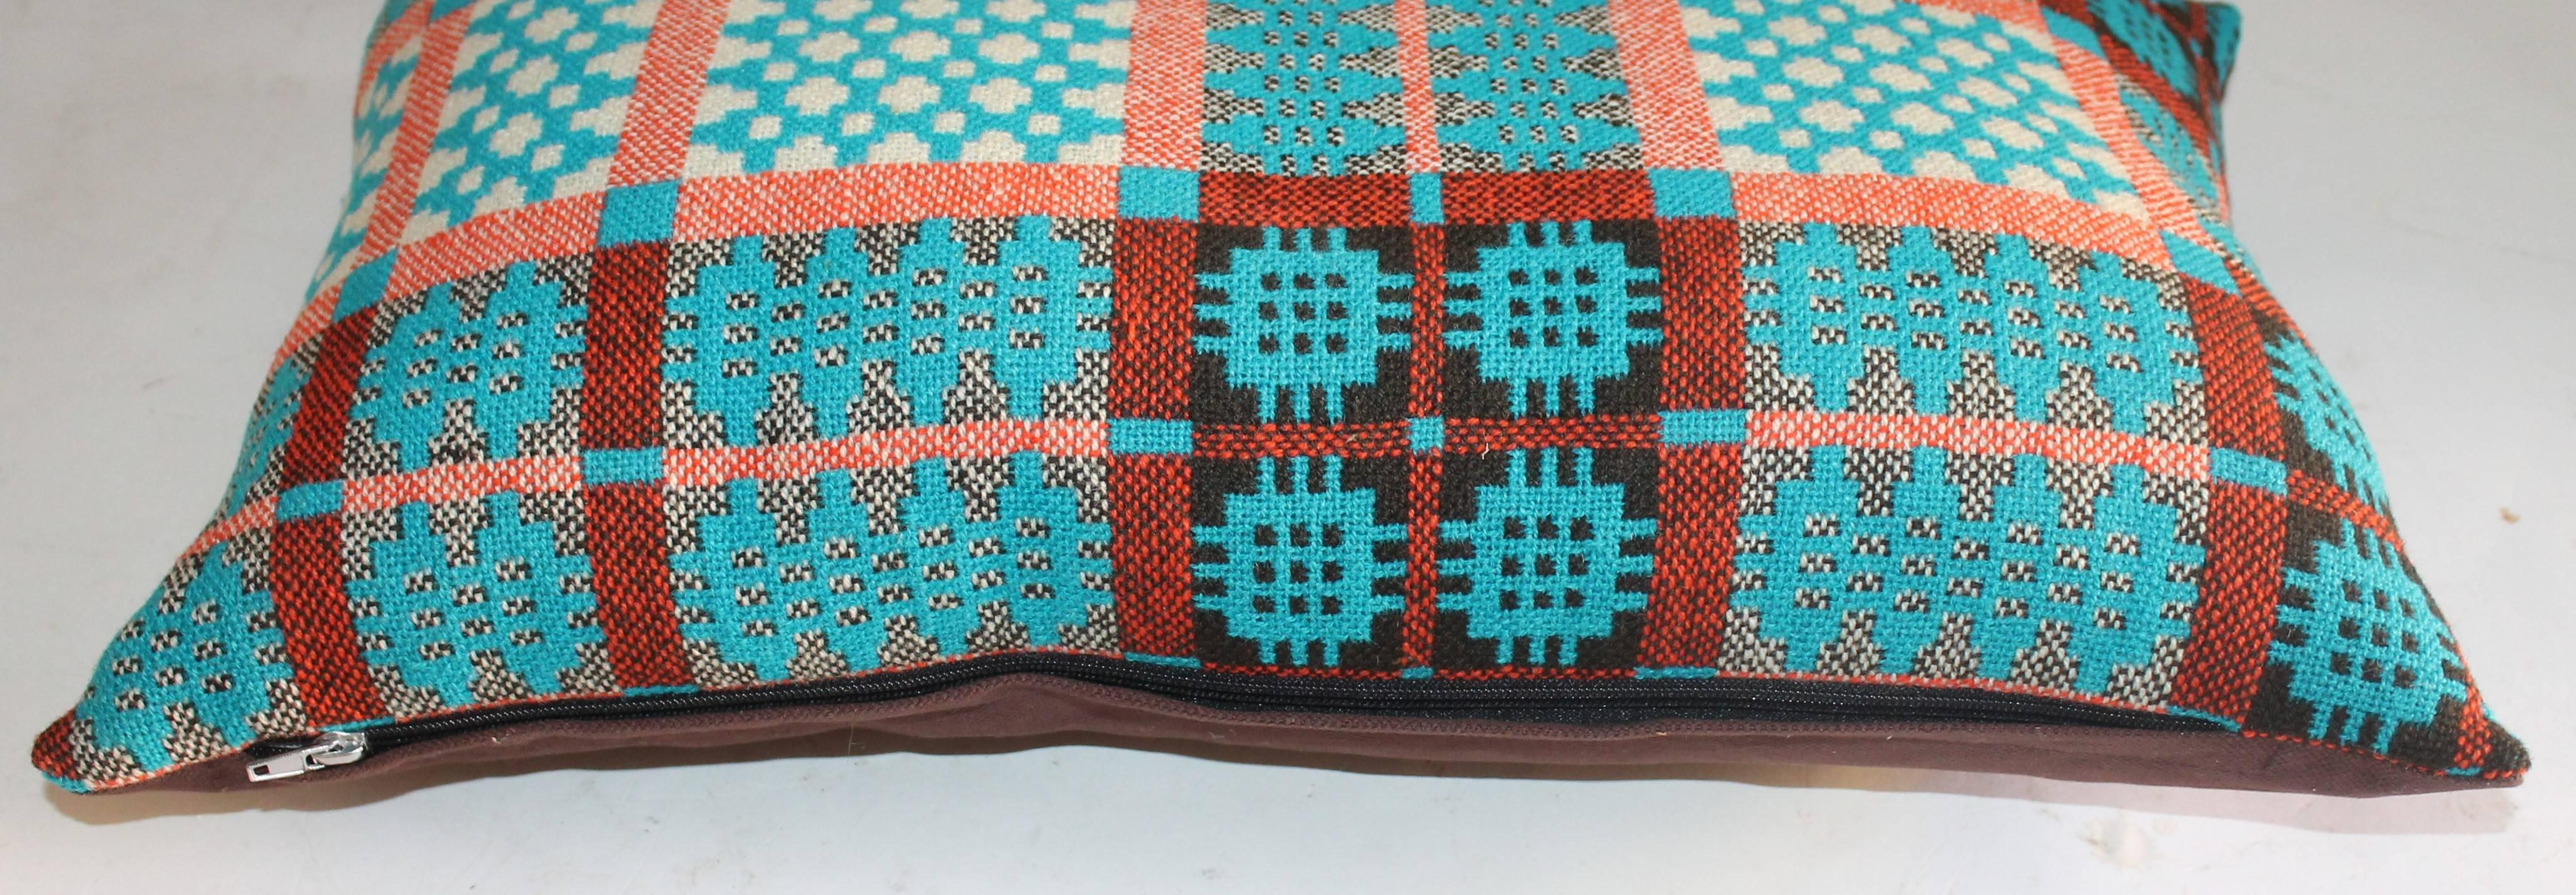 Hand-Crafted Turquoise Coverlet Pillows, Pair